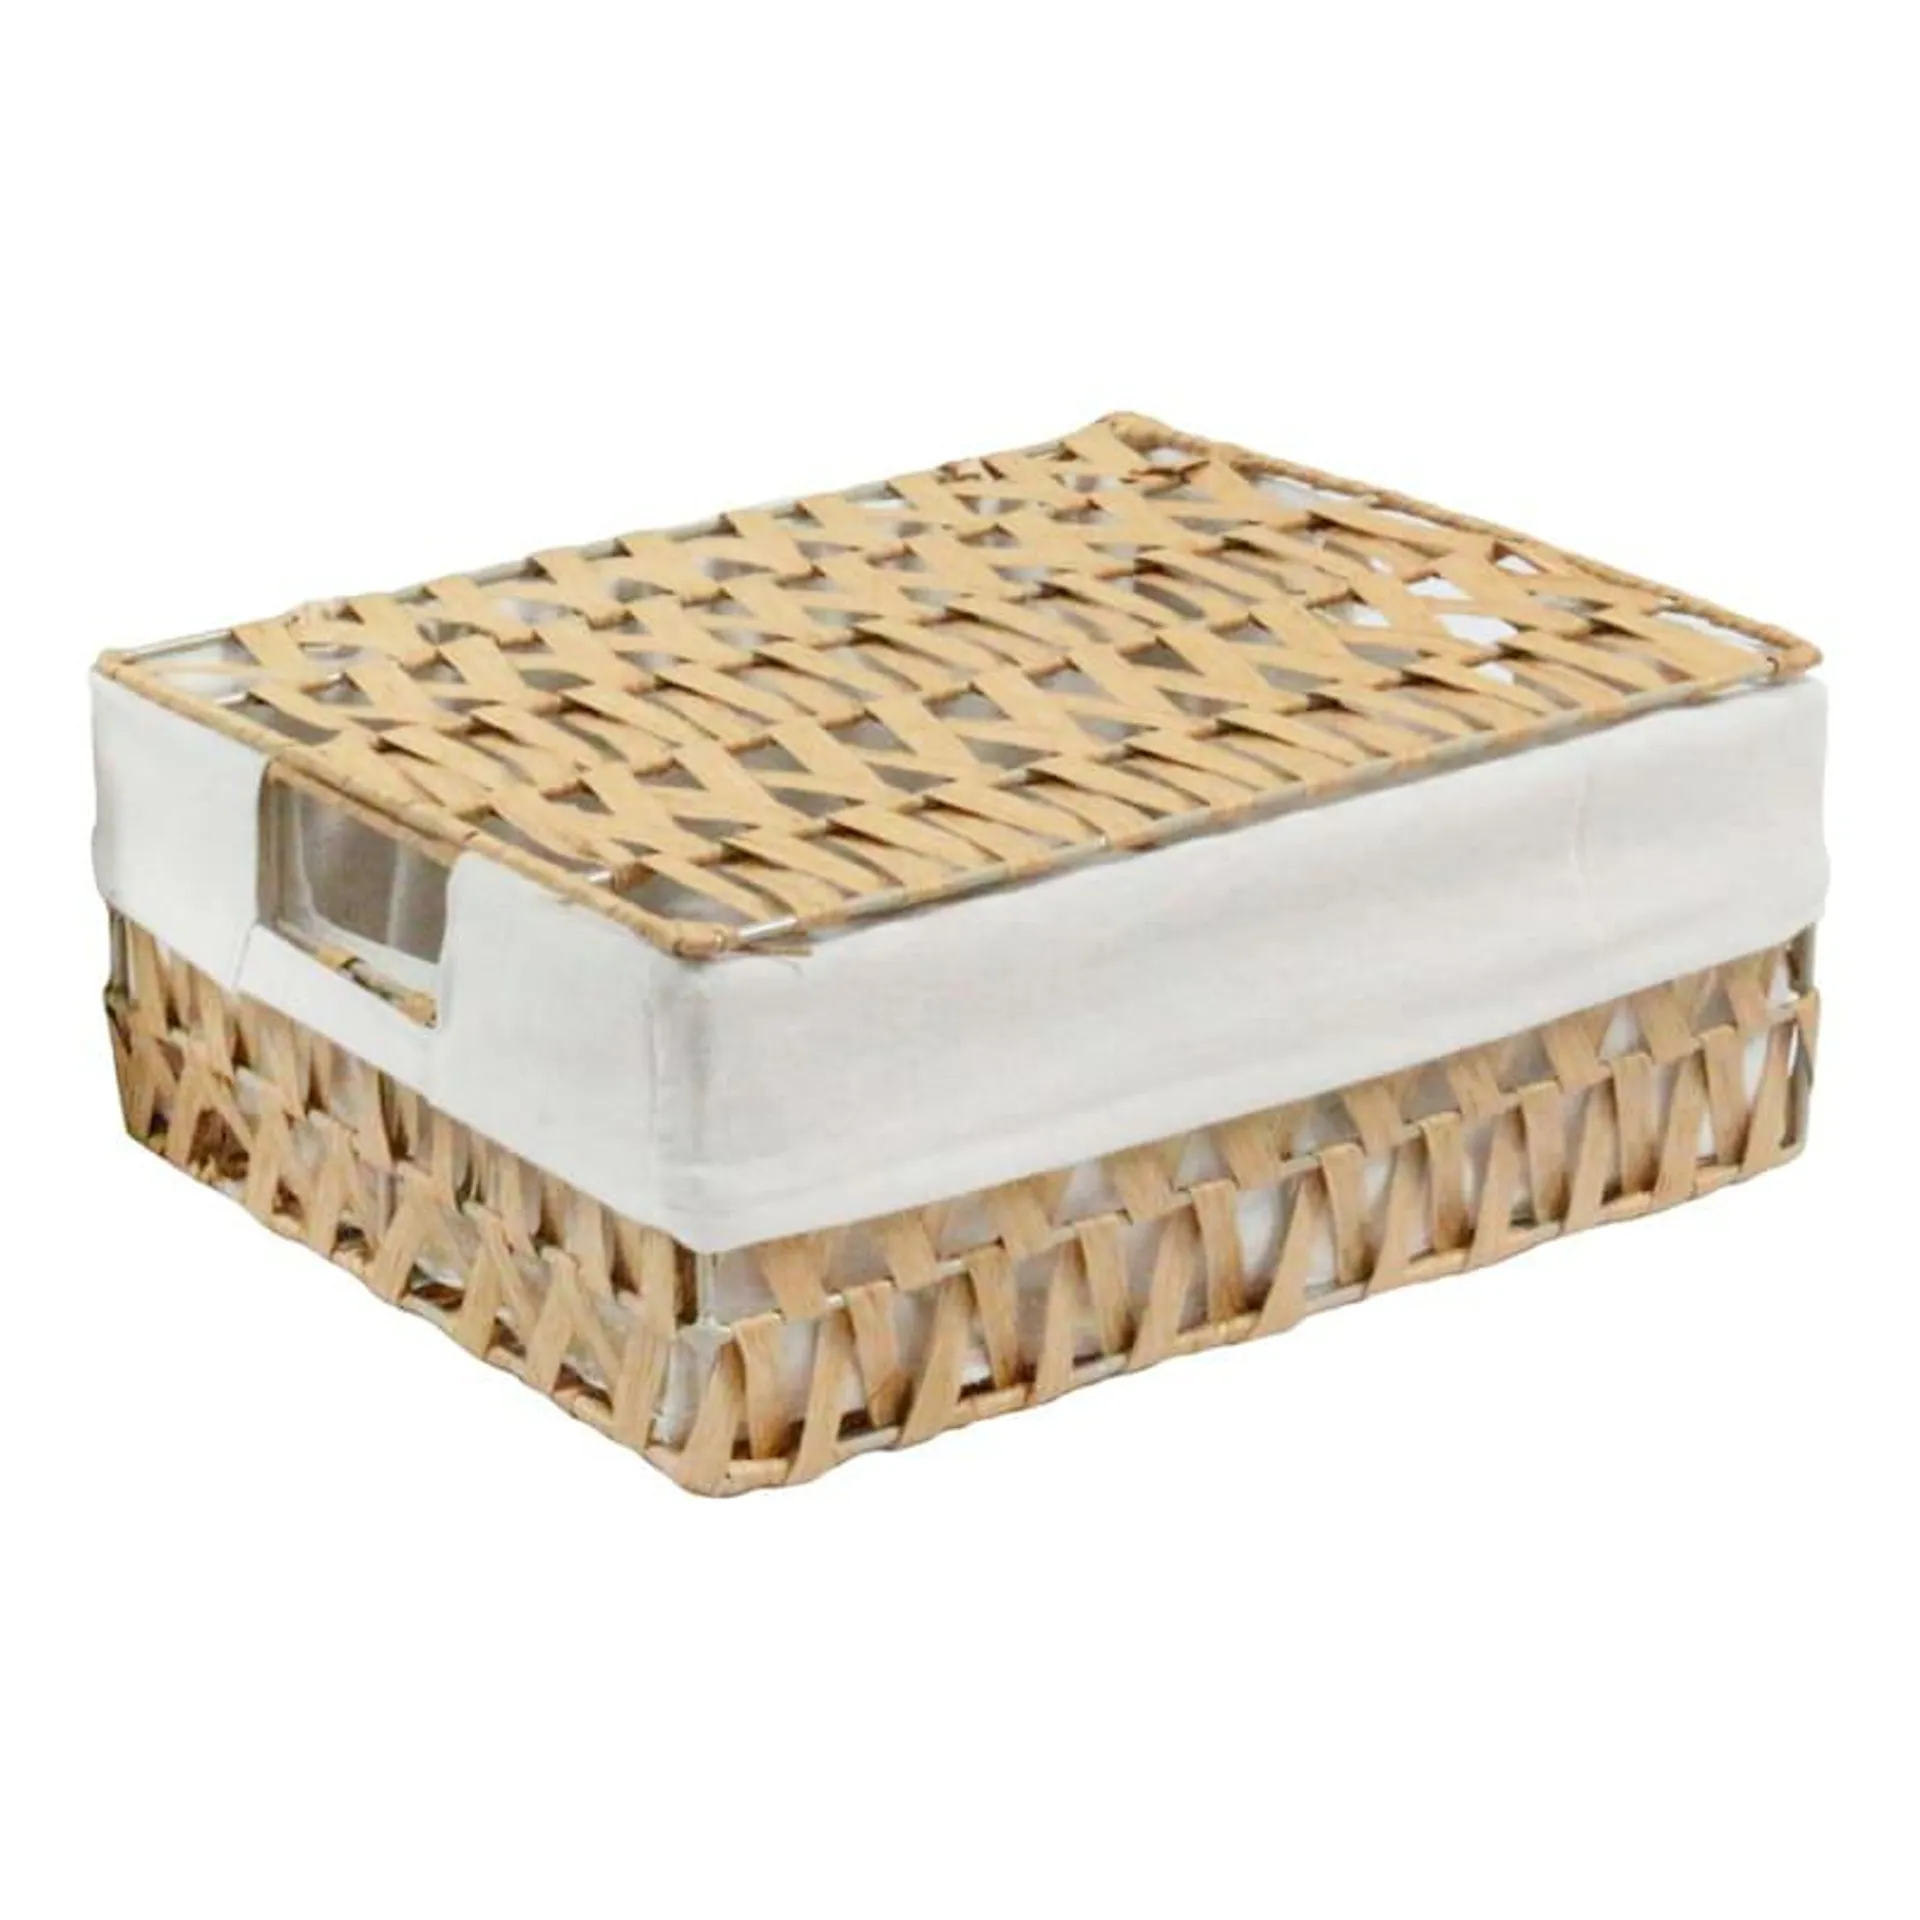 Chevy Natural Rectangle Storage Basket with Lid, Large